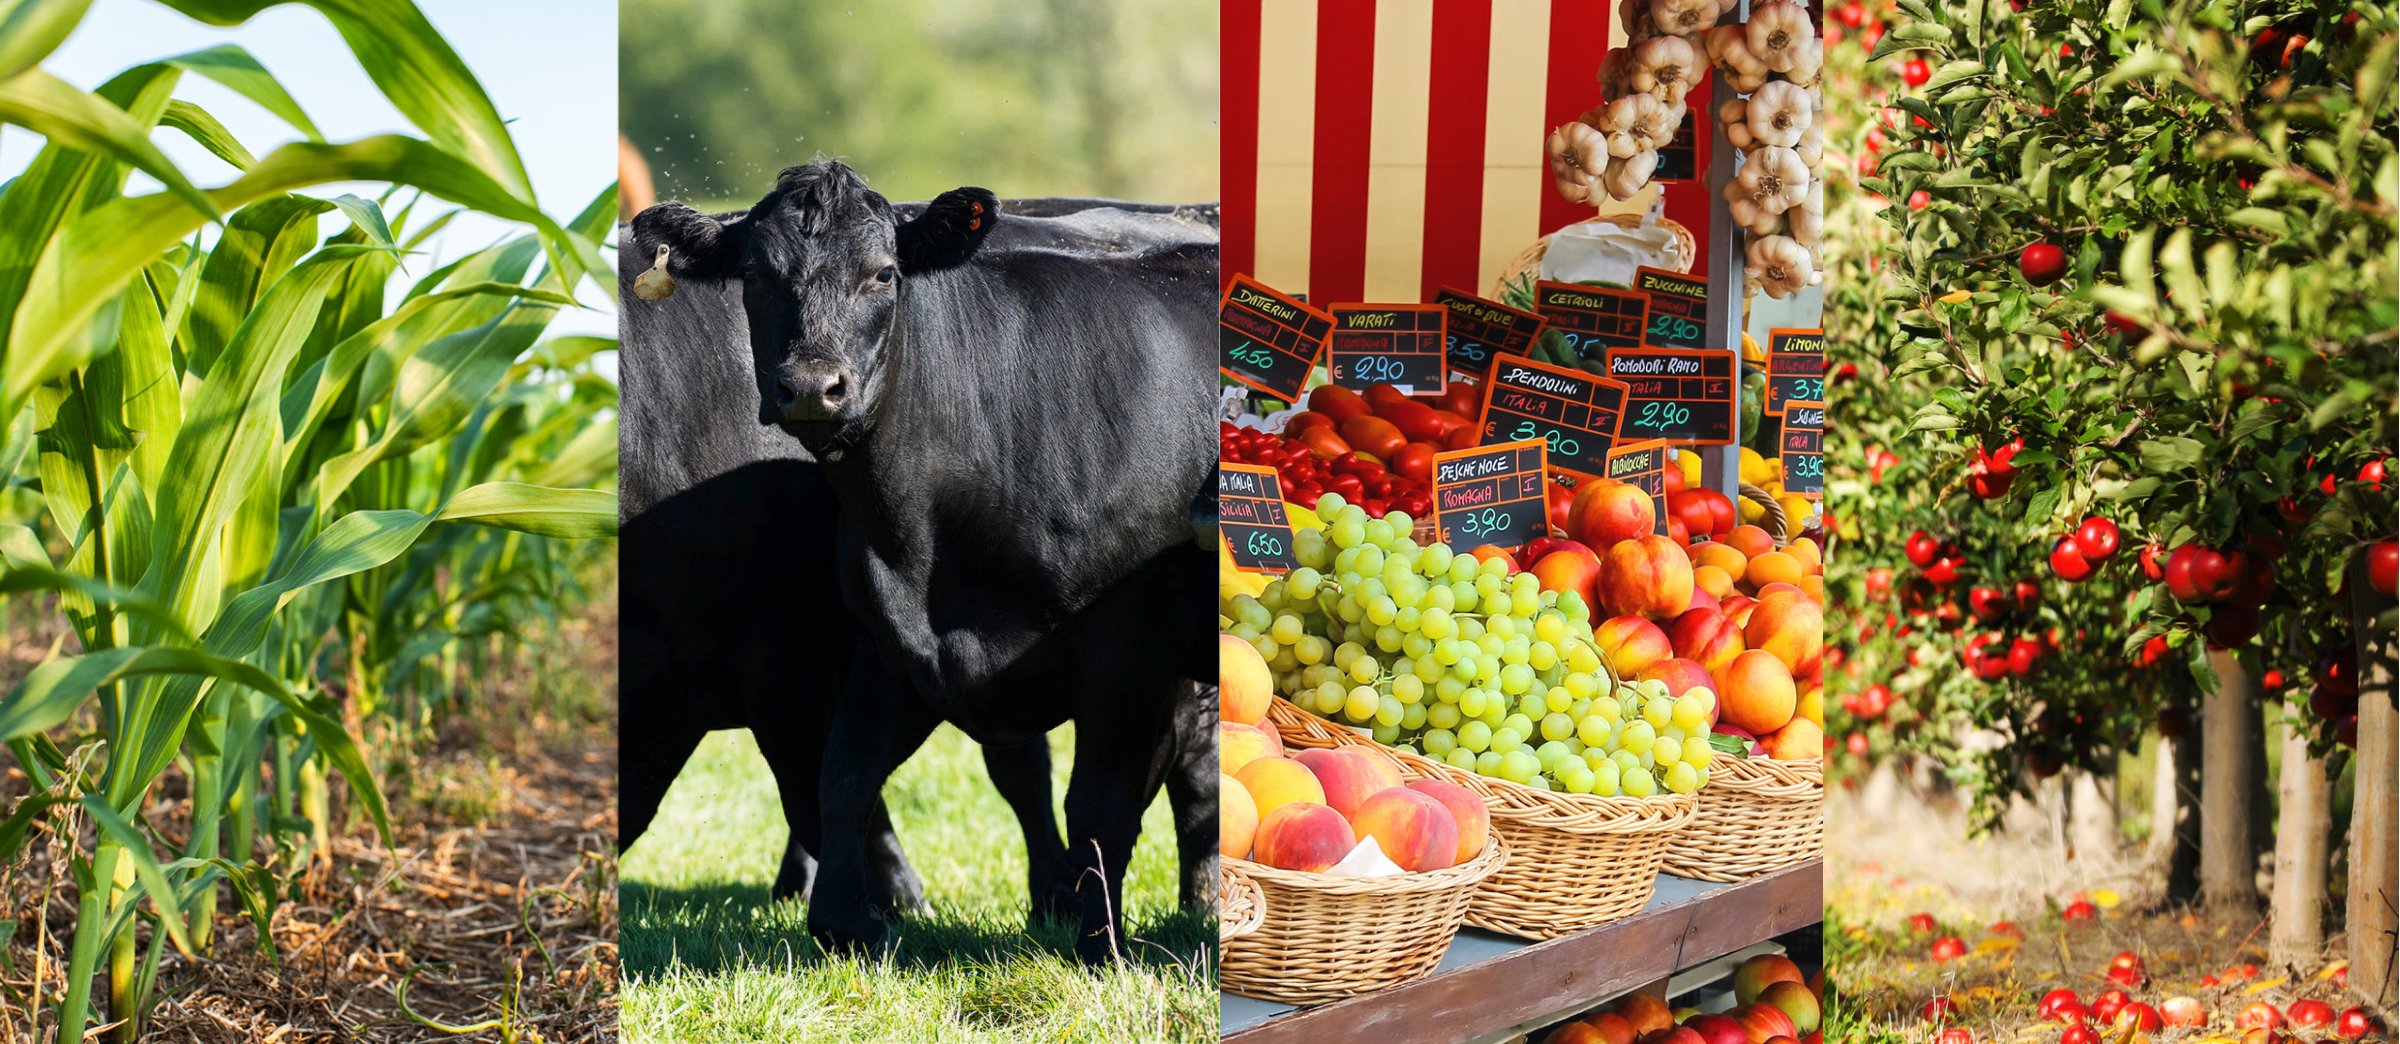 photo collage depicting corn, beef cattle, farmers market products, and a fruit tree orchard